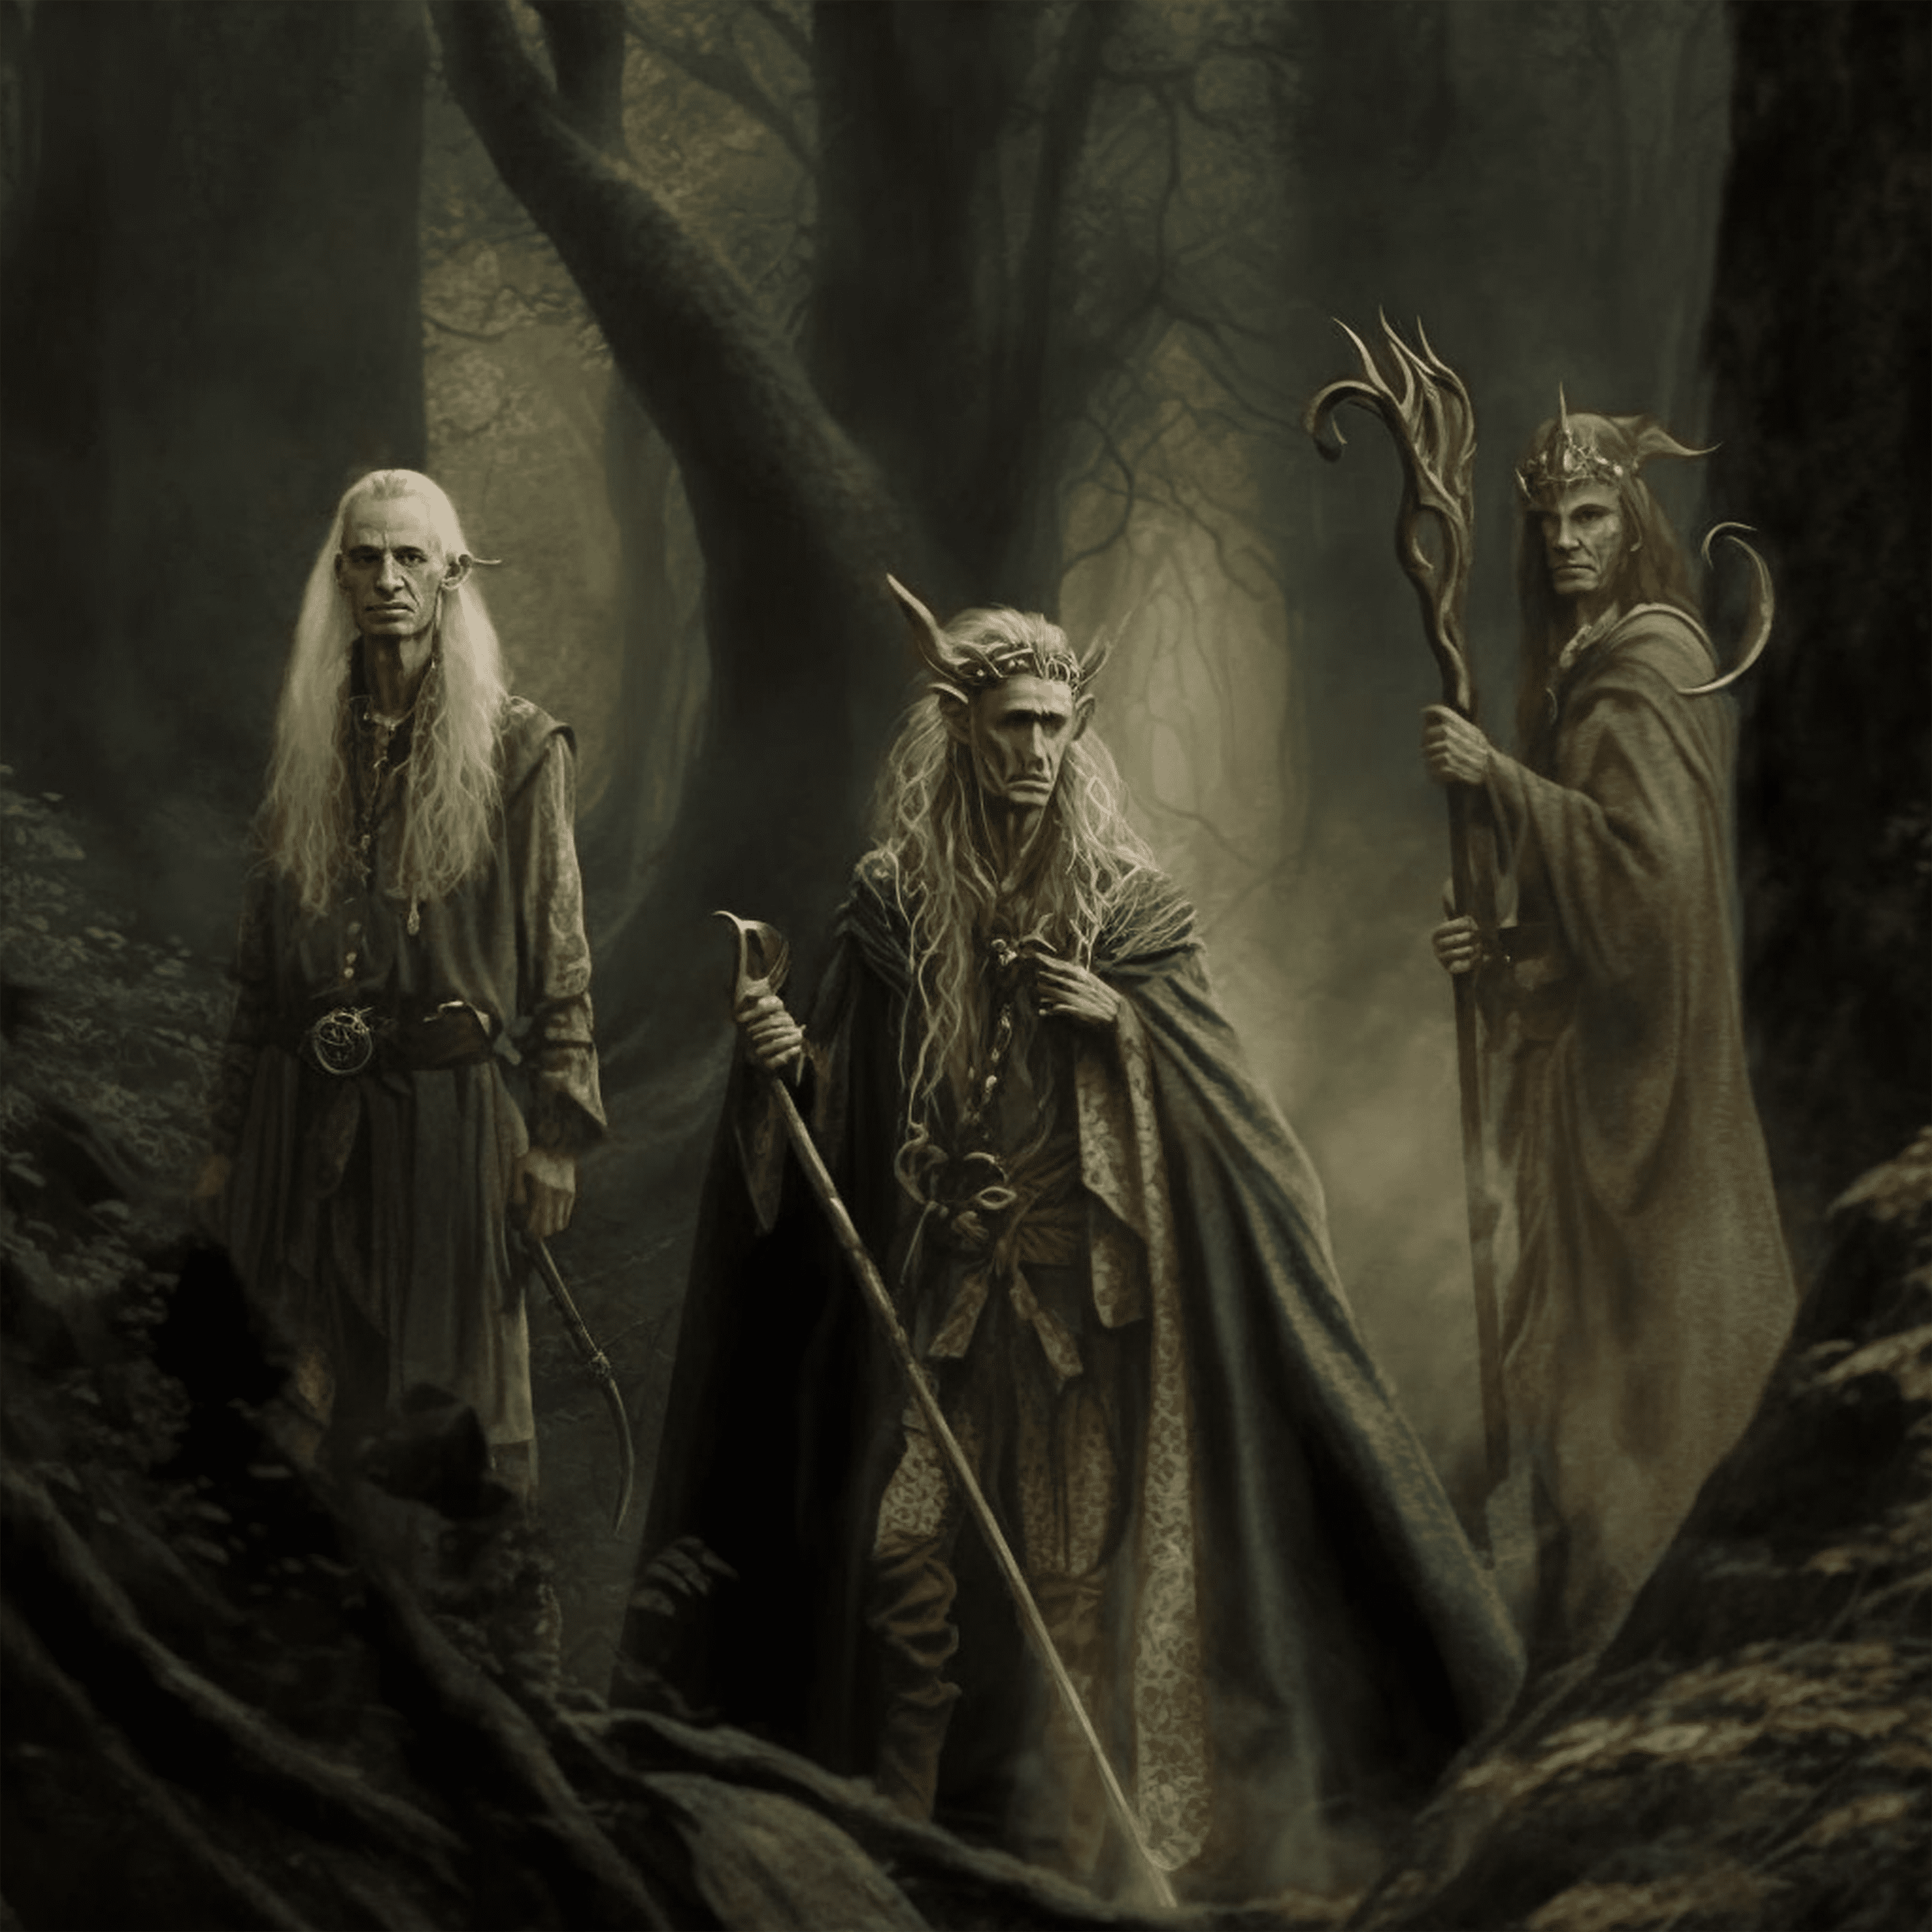 images/smmk_tattered_clothing_lord_of_the_rings_elves_in_woods_1873e999-6cc5-45bc-96d5-91a948815759-0000.png